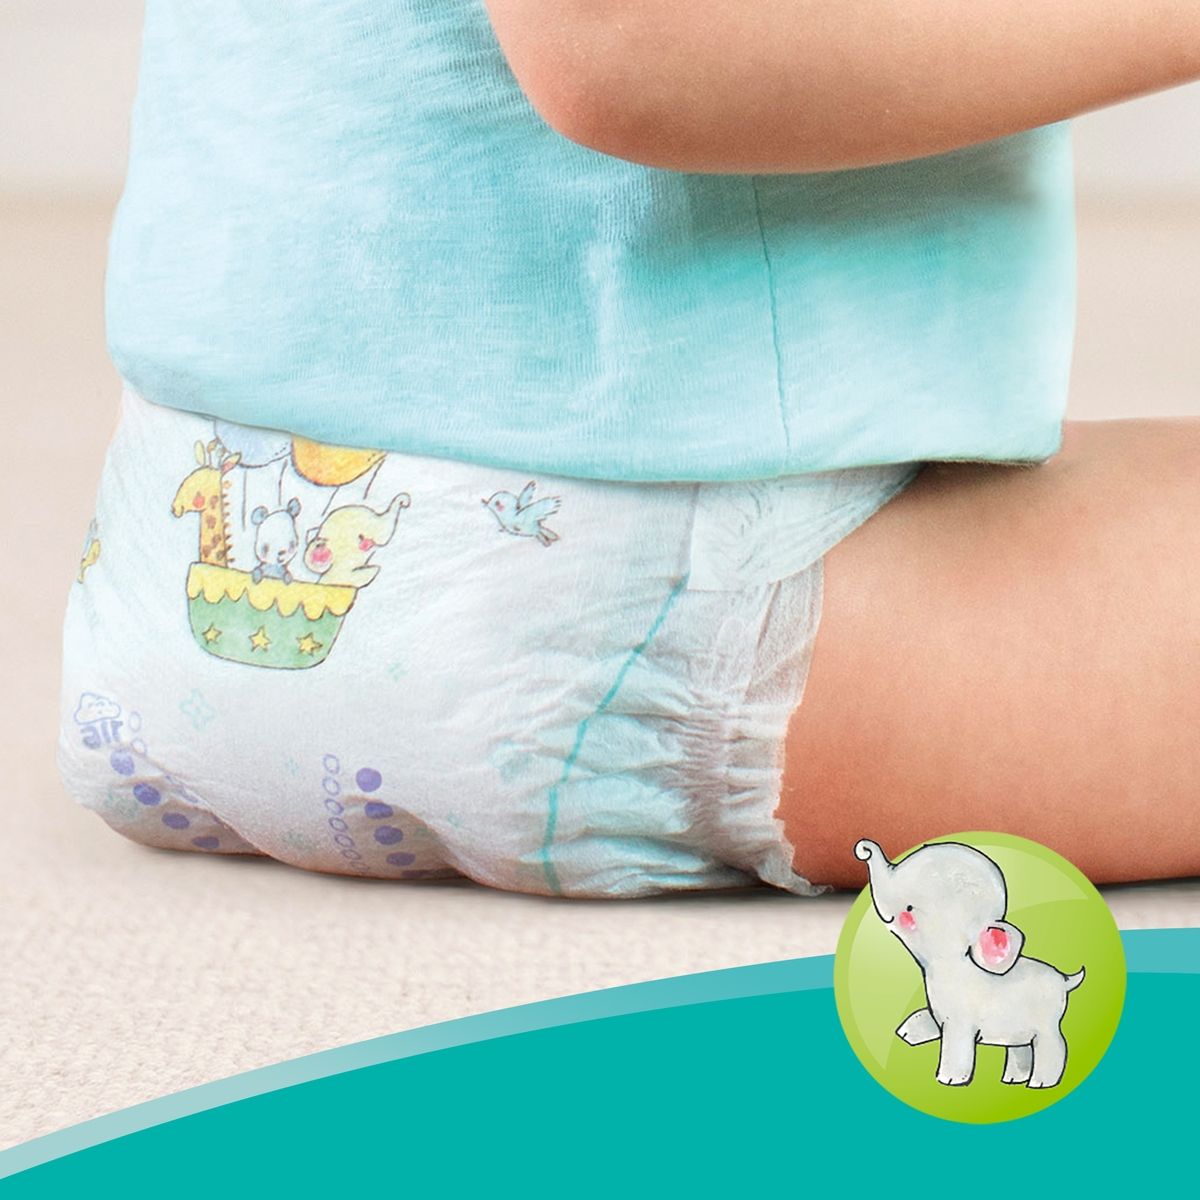 Pampers  Active Baby-Dry 11-16  Junior 150 